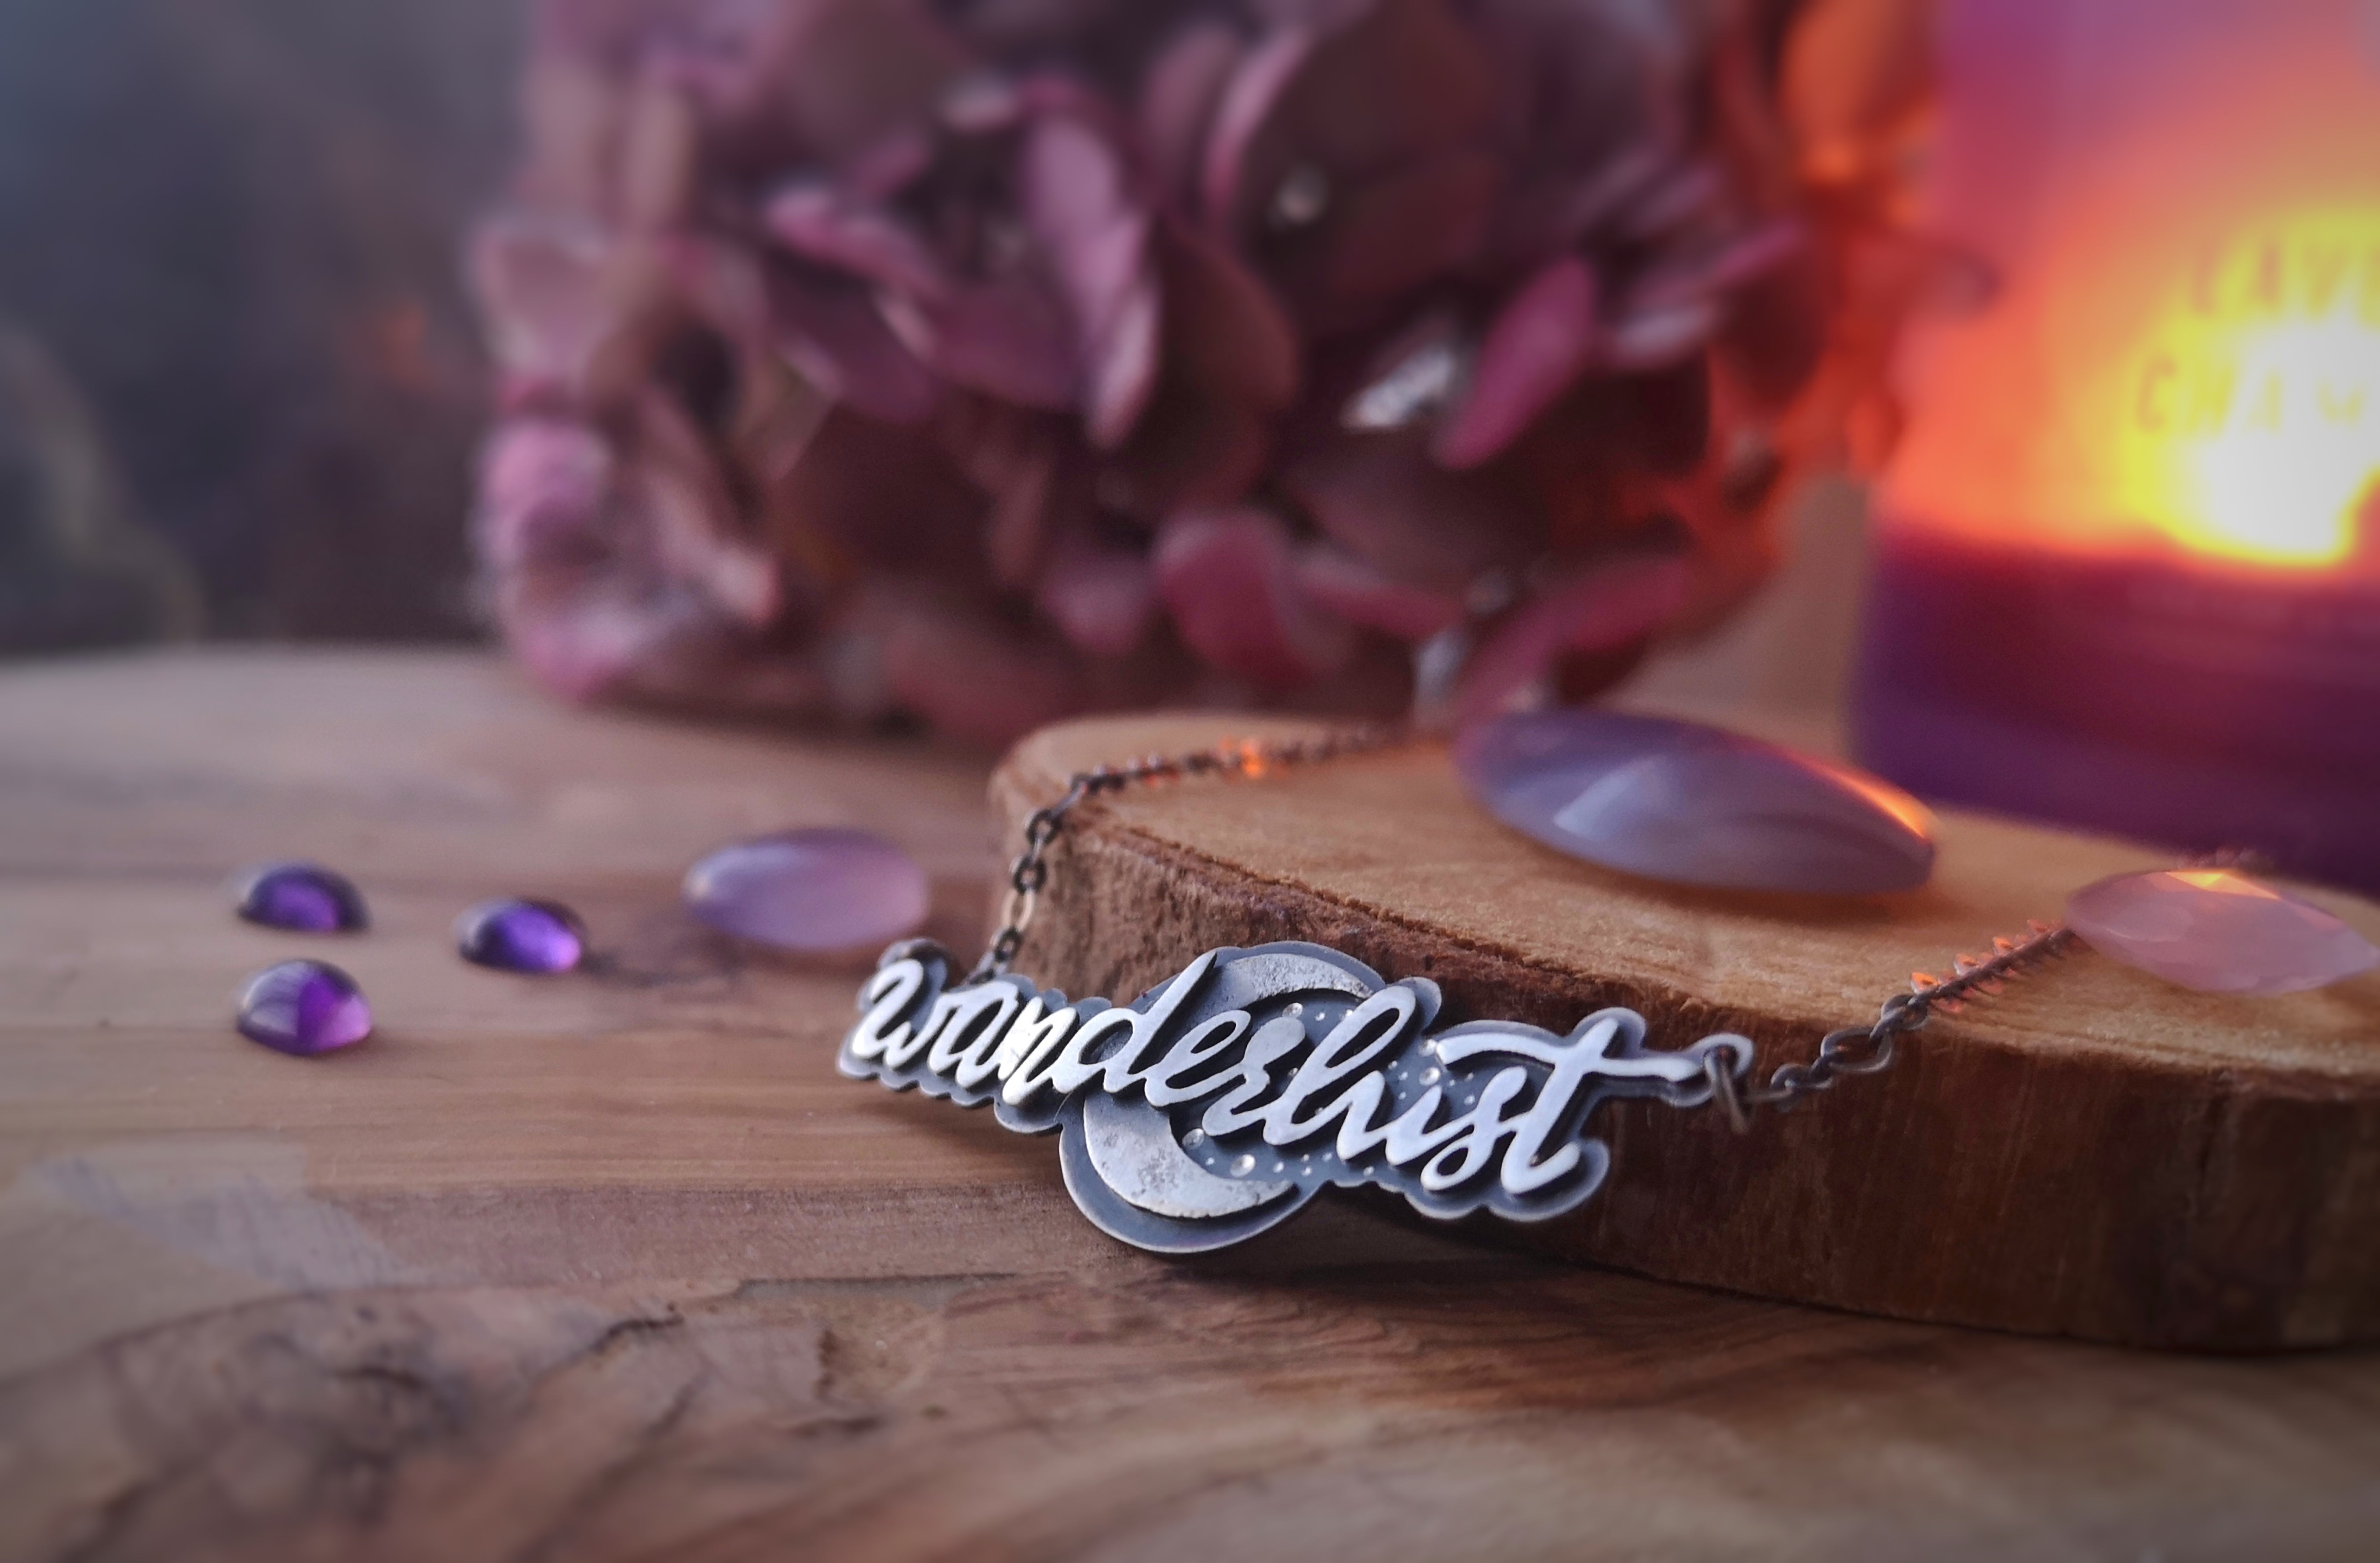 The Wanderlust Necklace